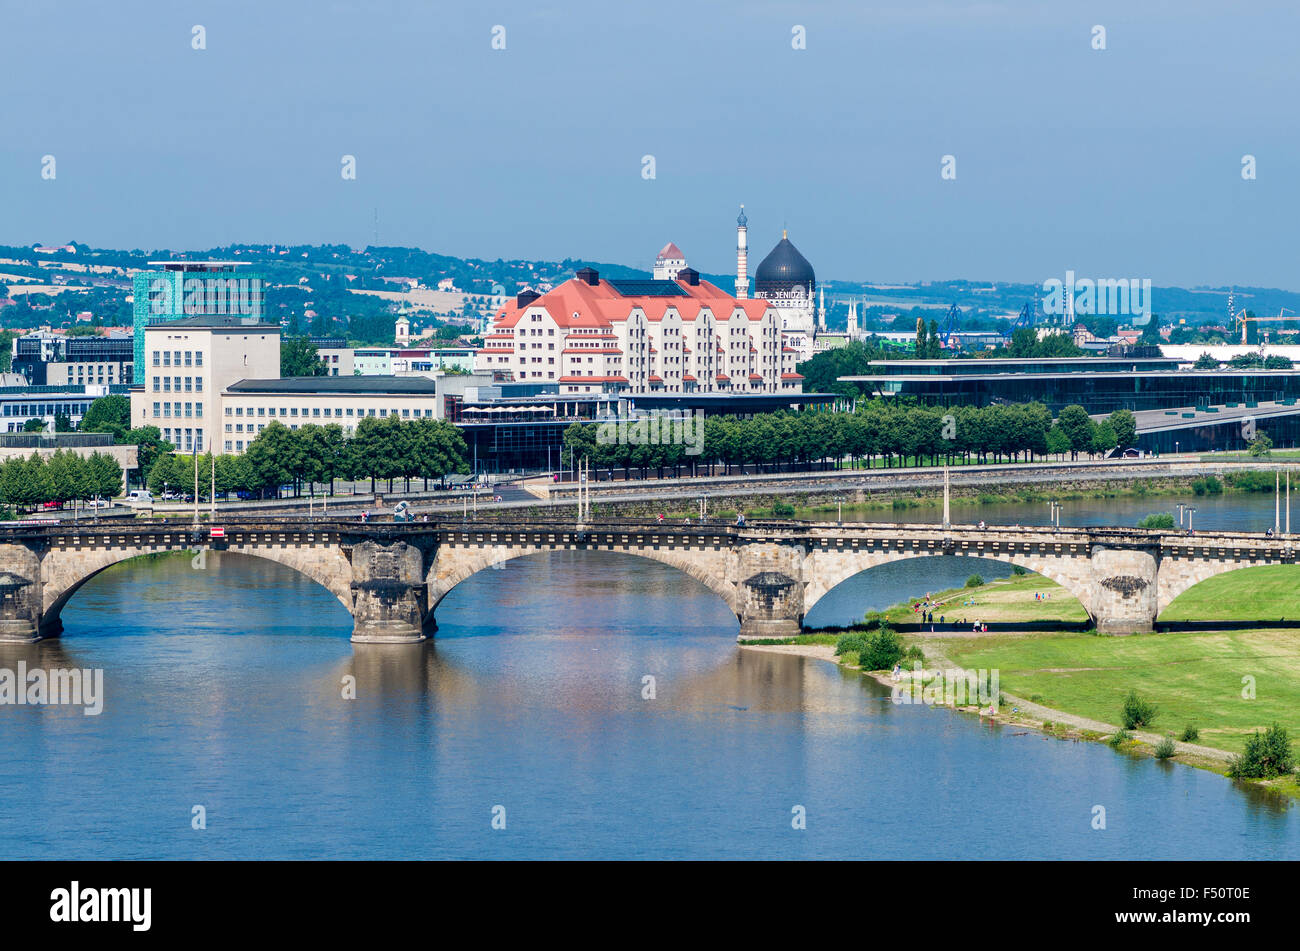 The Maritim Hotel and the congress centre behind the Marien Bridge crossing the river Elbe Stock Photo